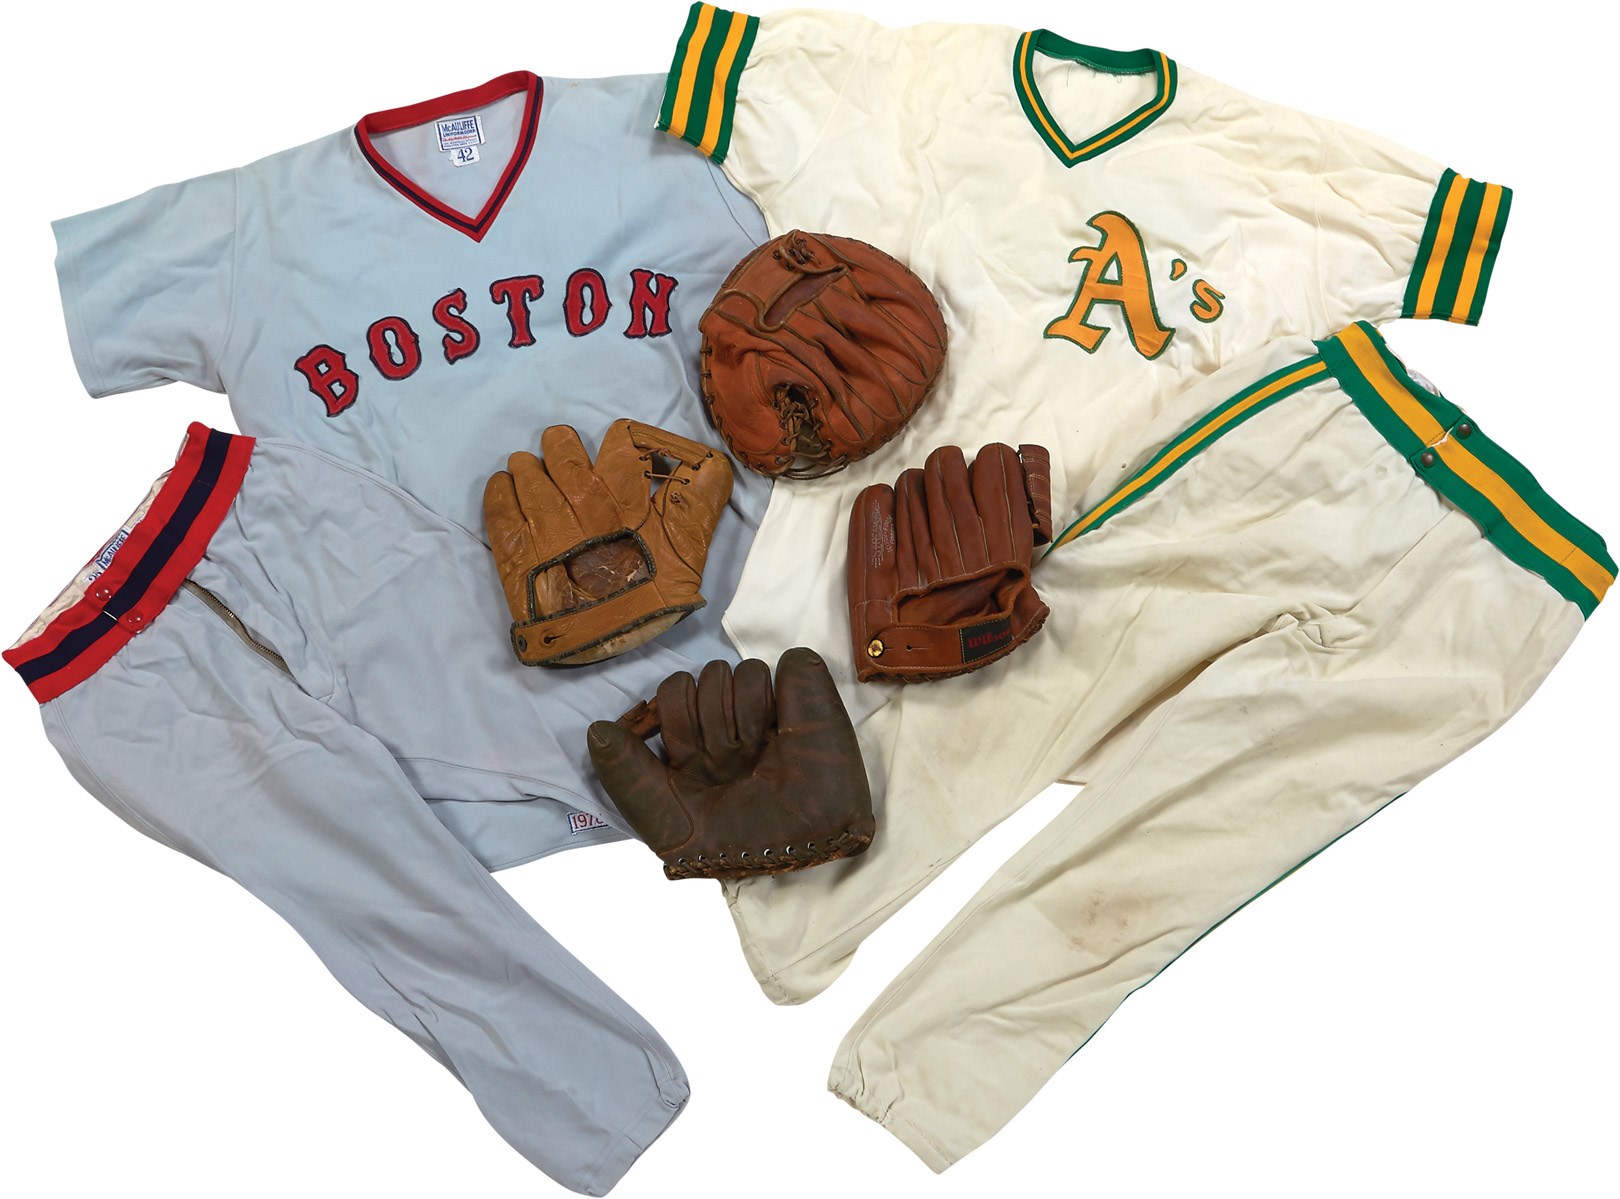 Baseball Equipment - 1970s Game Worn Uniforms and Gloves (6)